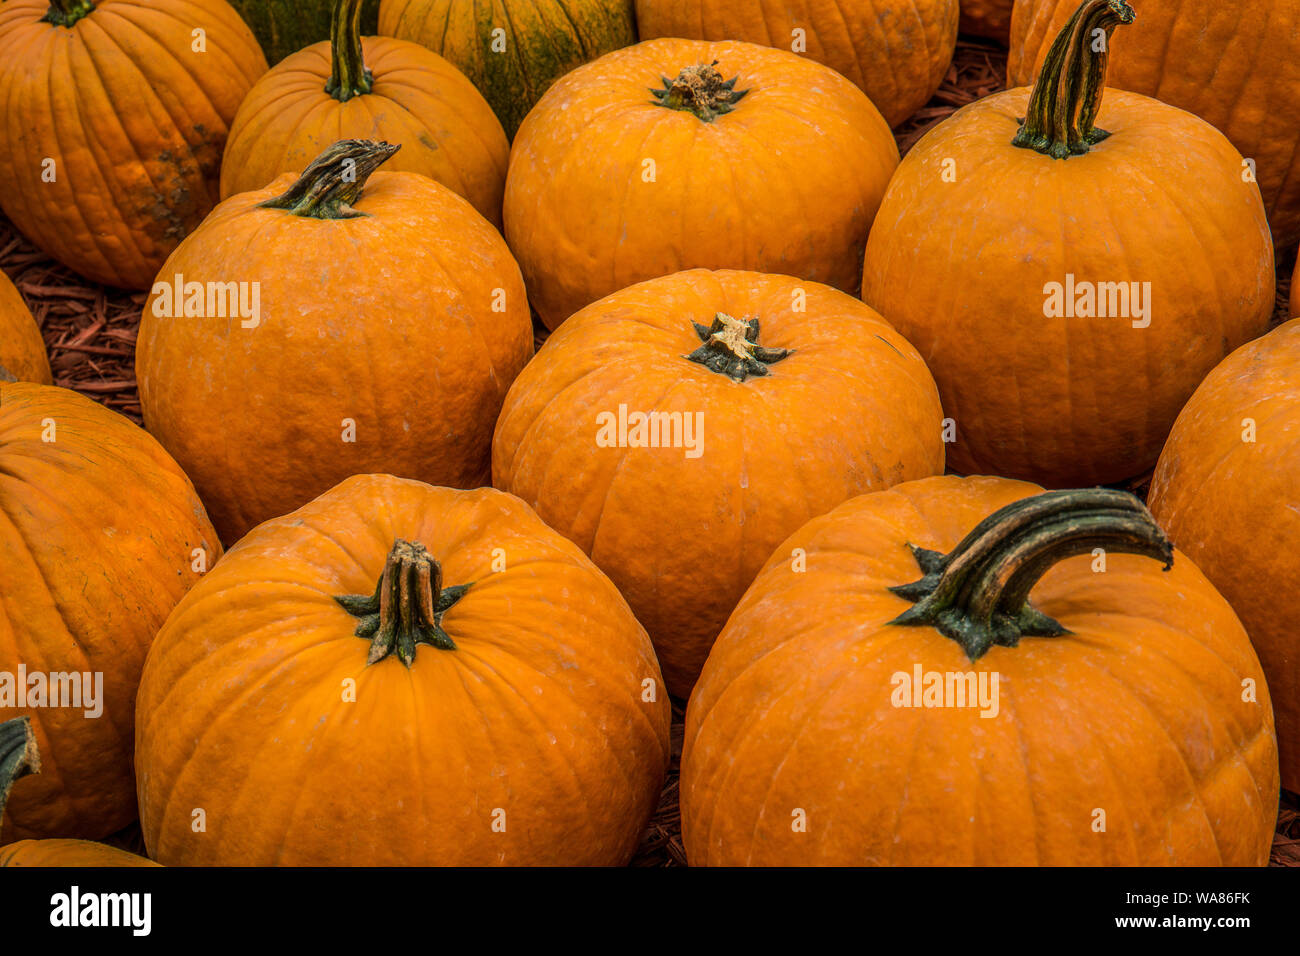 Medium size pumpkins grouped together for sale close up Stock Photo